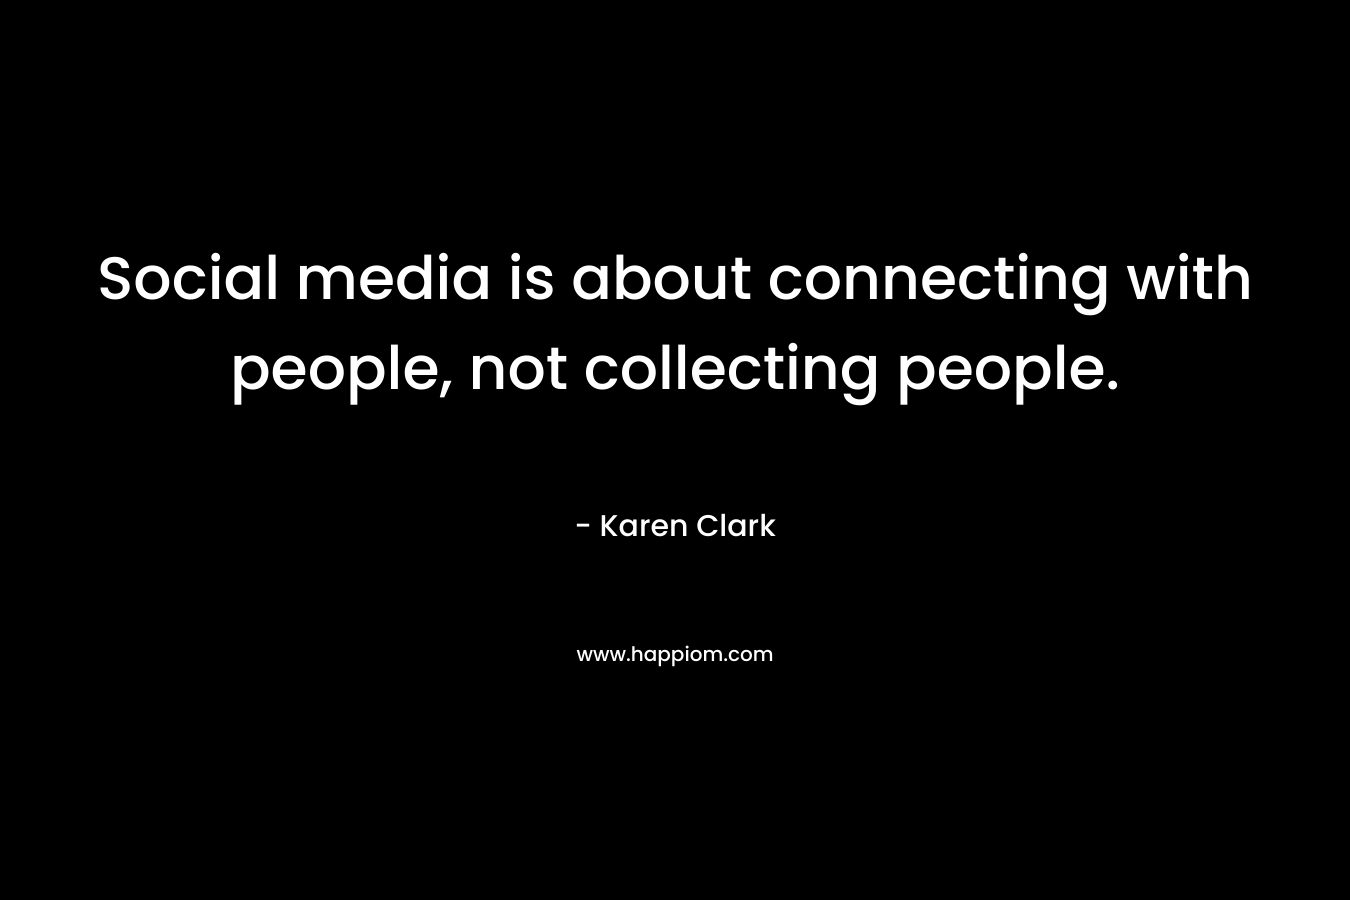 Social media is about connecting with people, not collecting people.